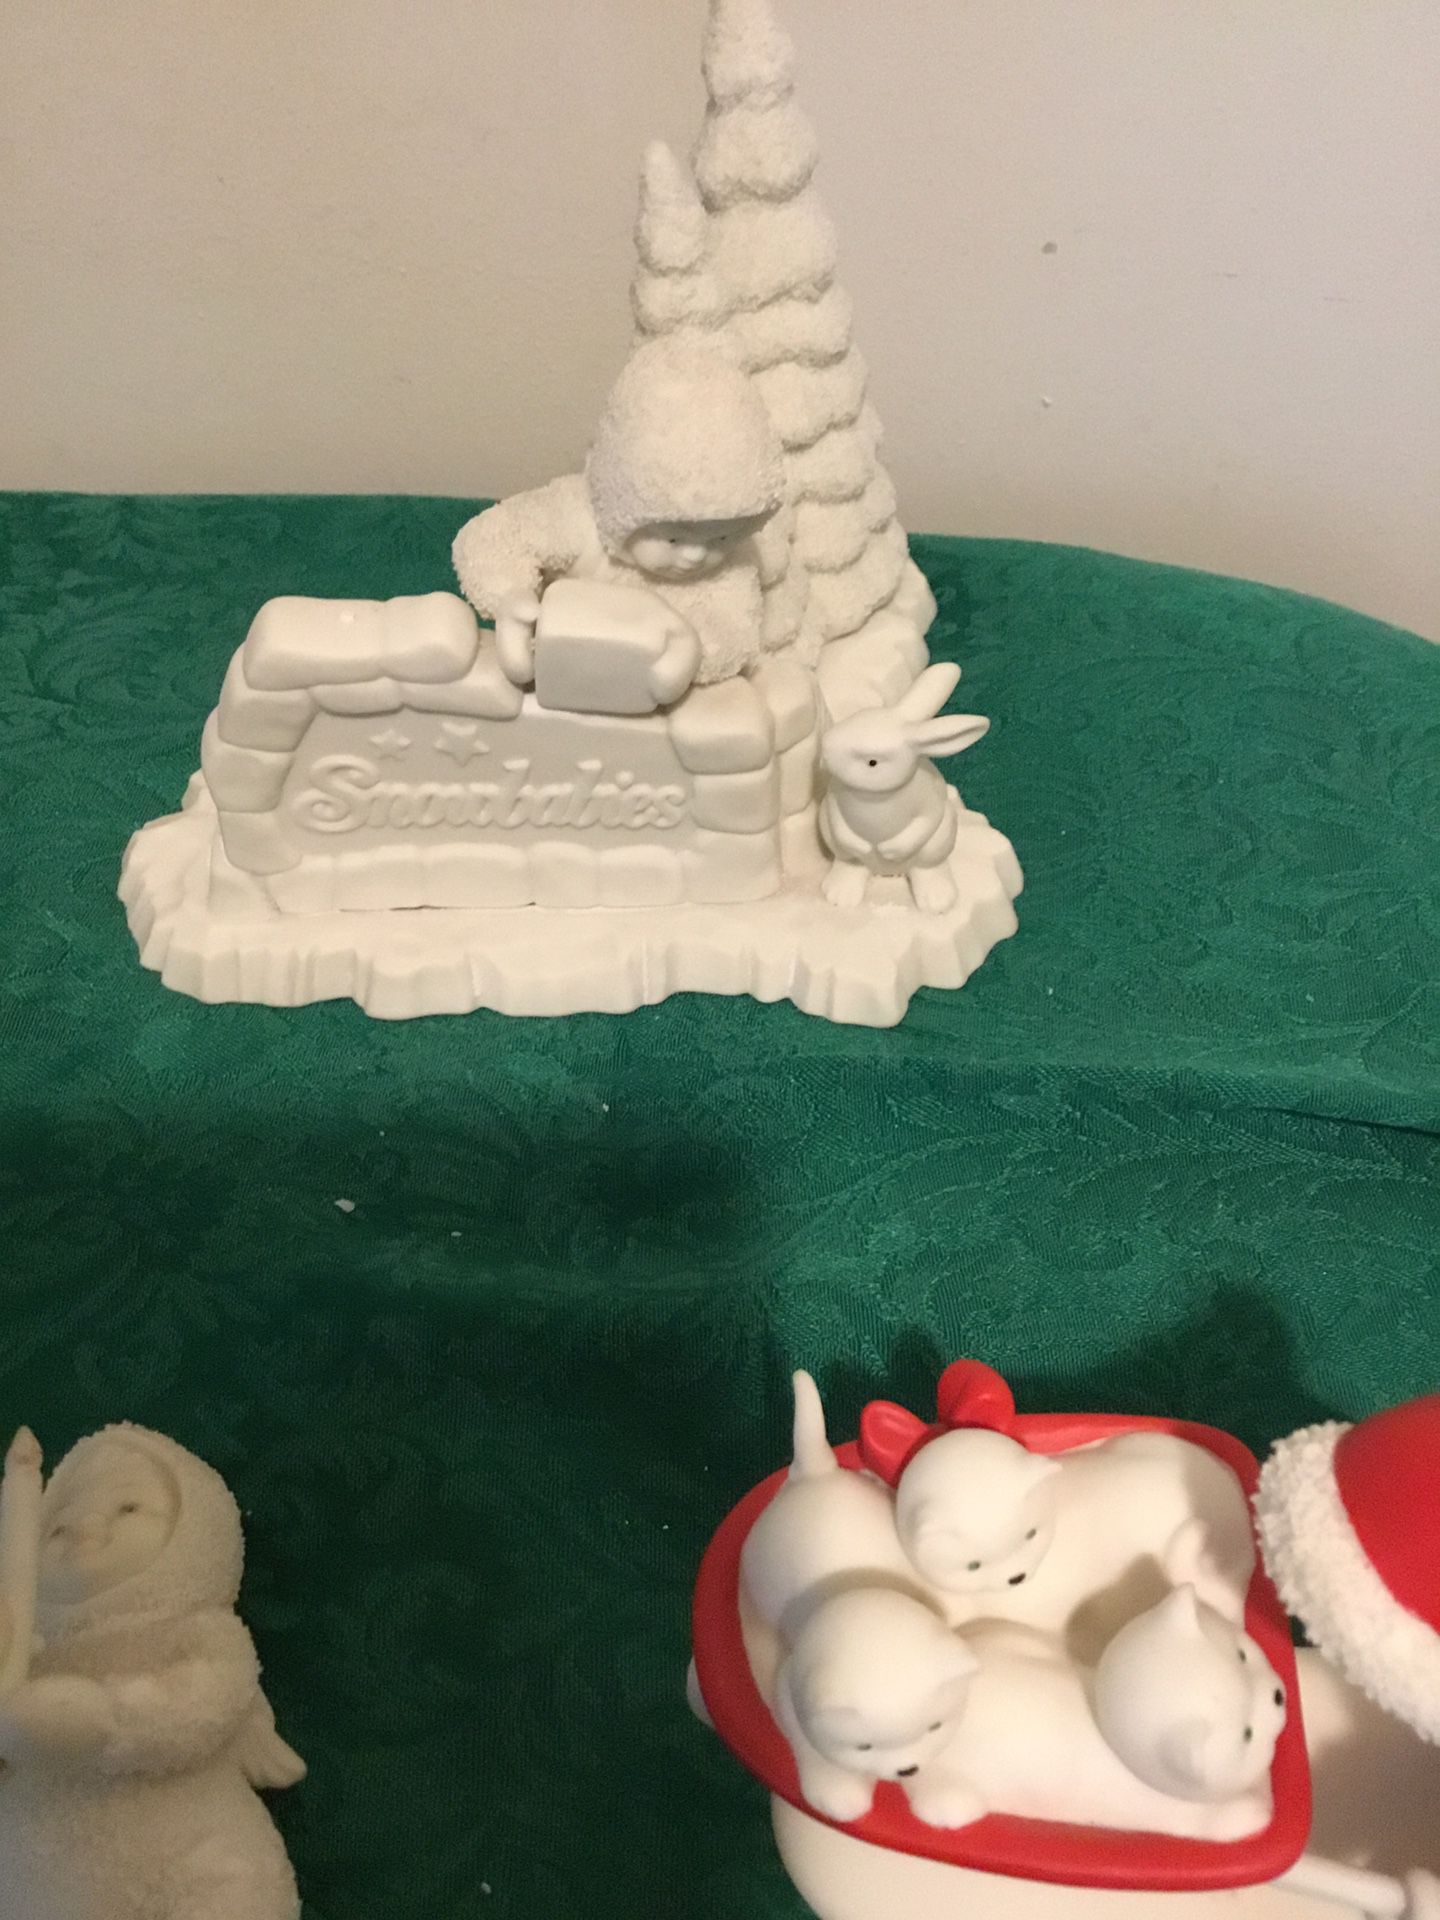 Three Dept 56 Snow Babies Kittens, Candle, Bunny Wall With Sign